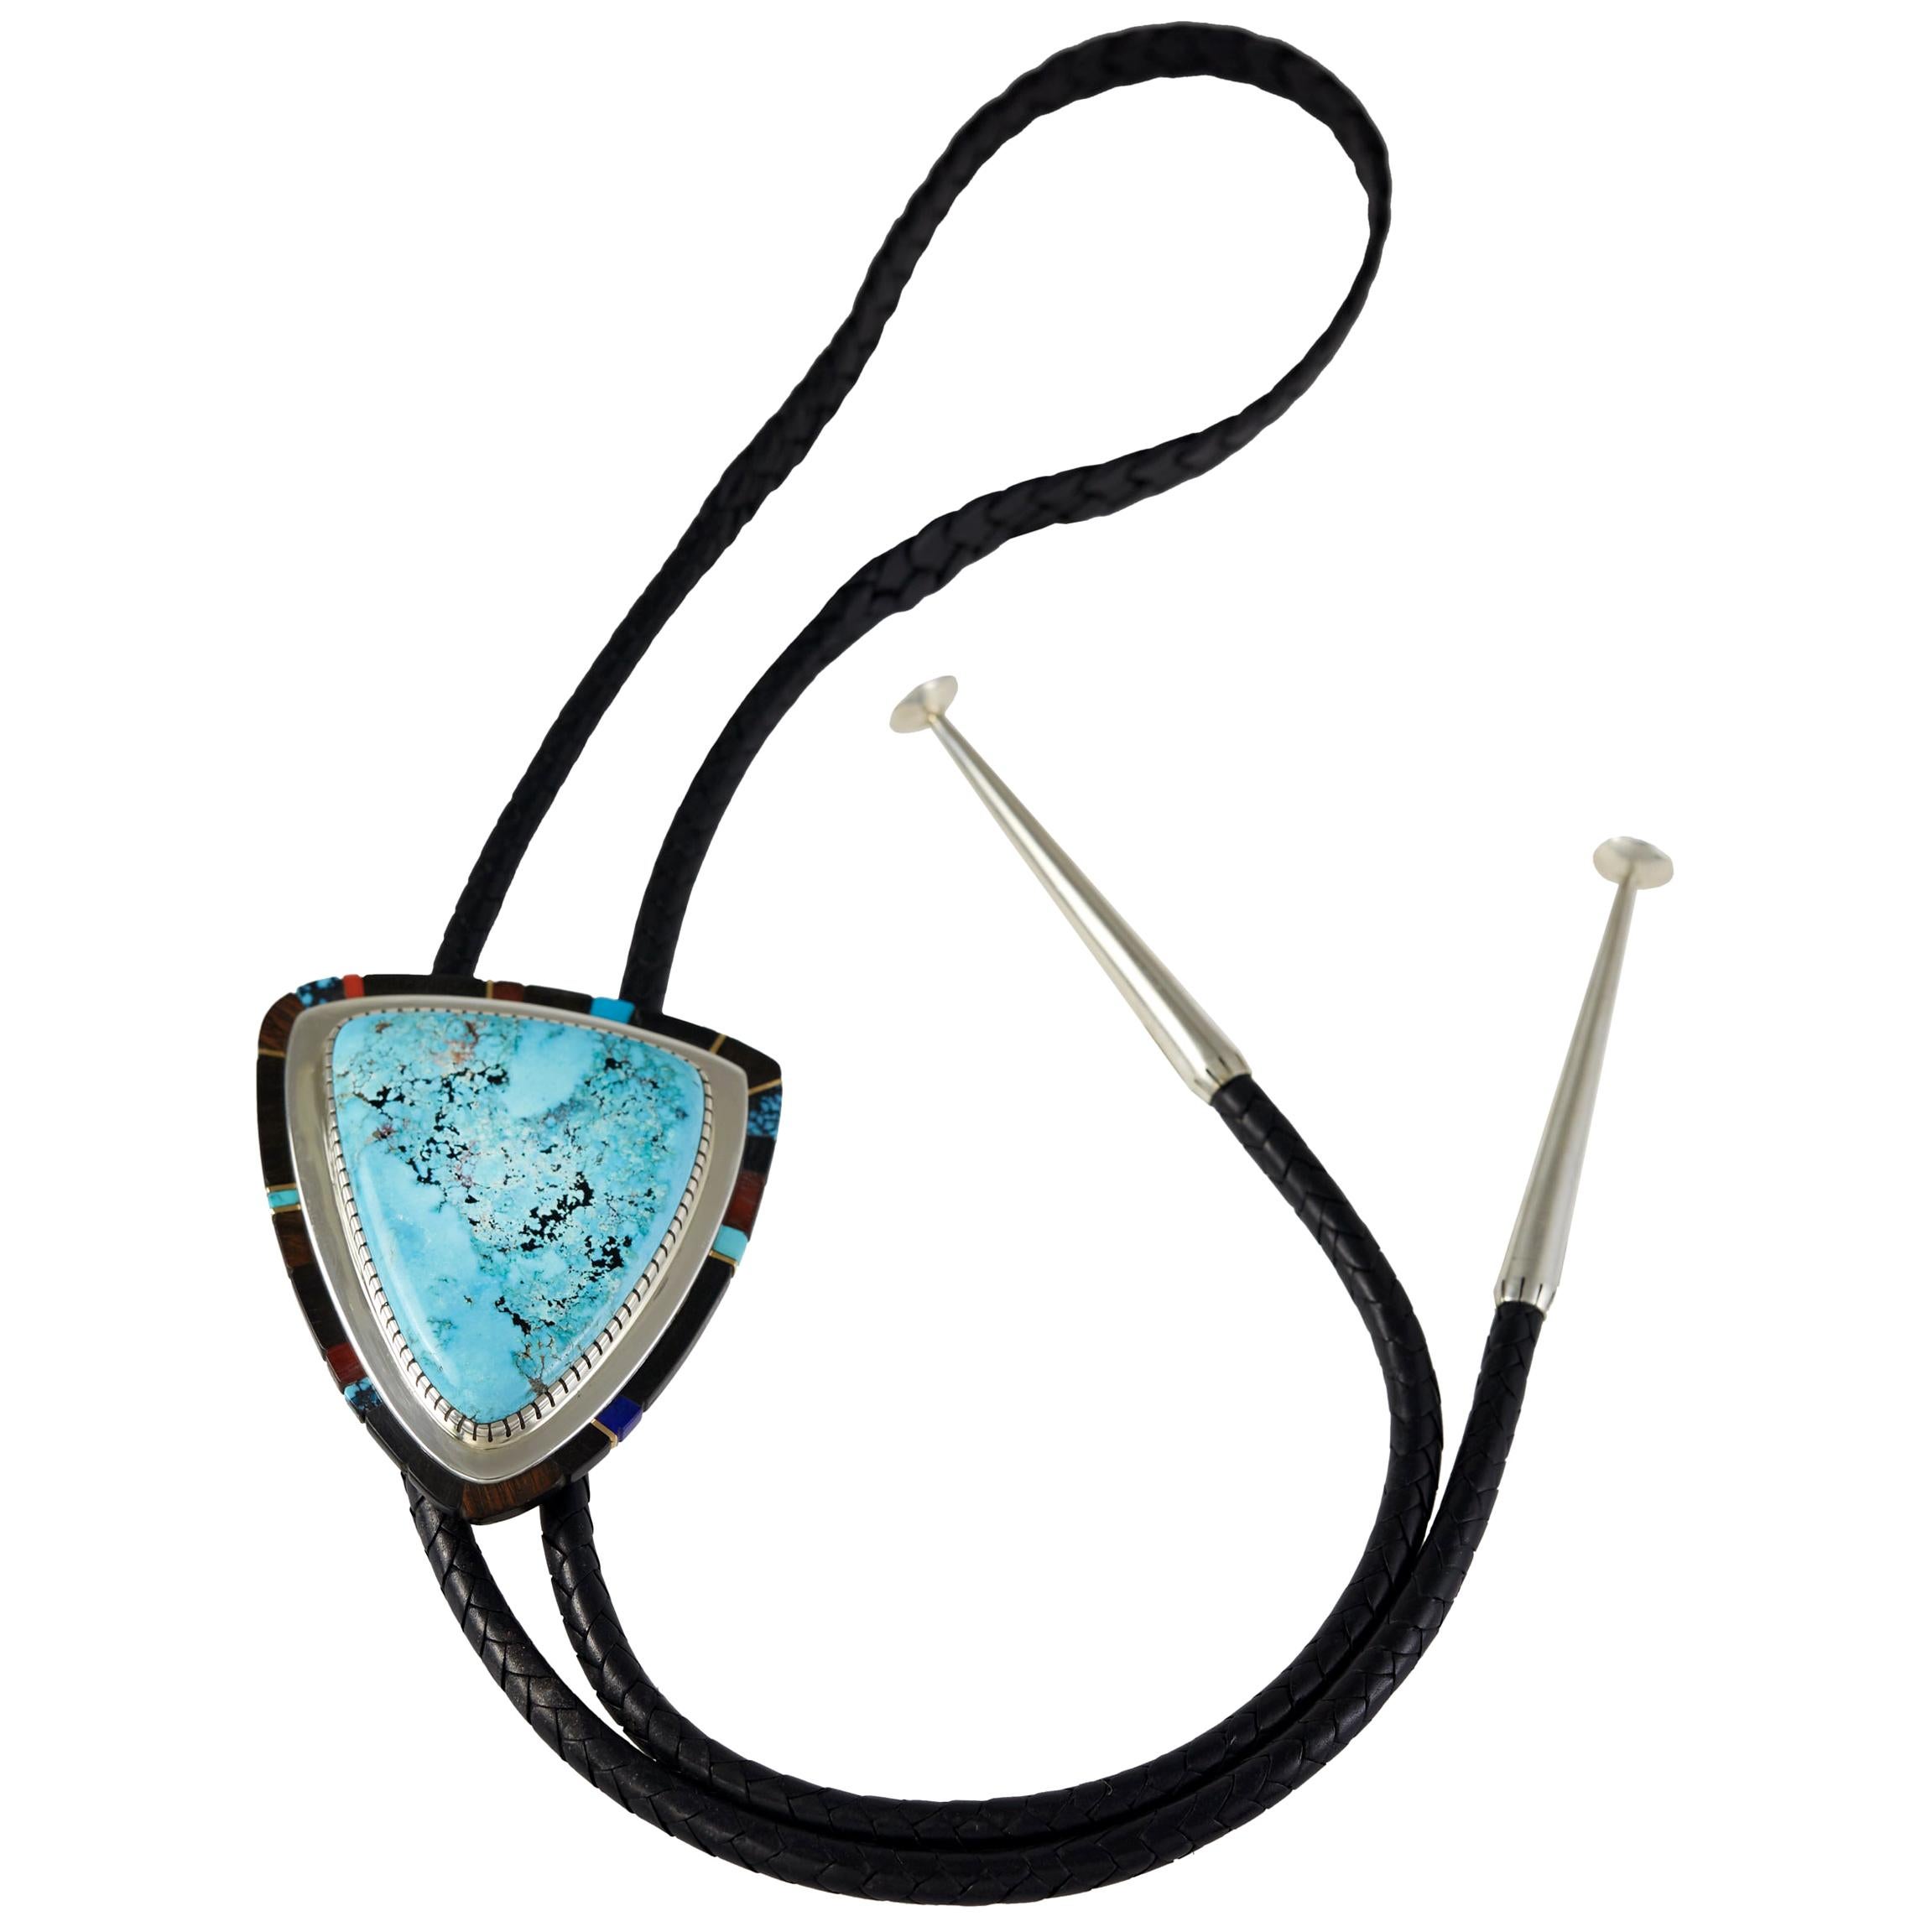 2017 Verma Nequetewa 'Sonwai' Morenci Turquoise, Coral and Silver Bolo Tie